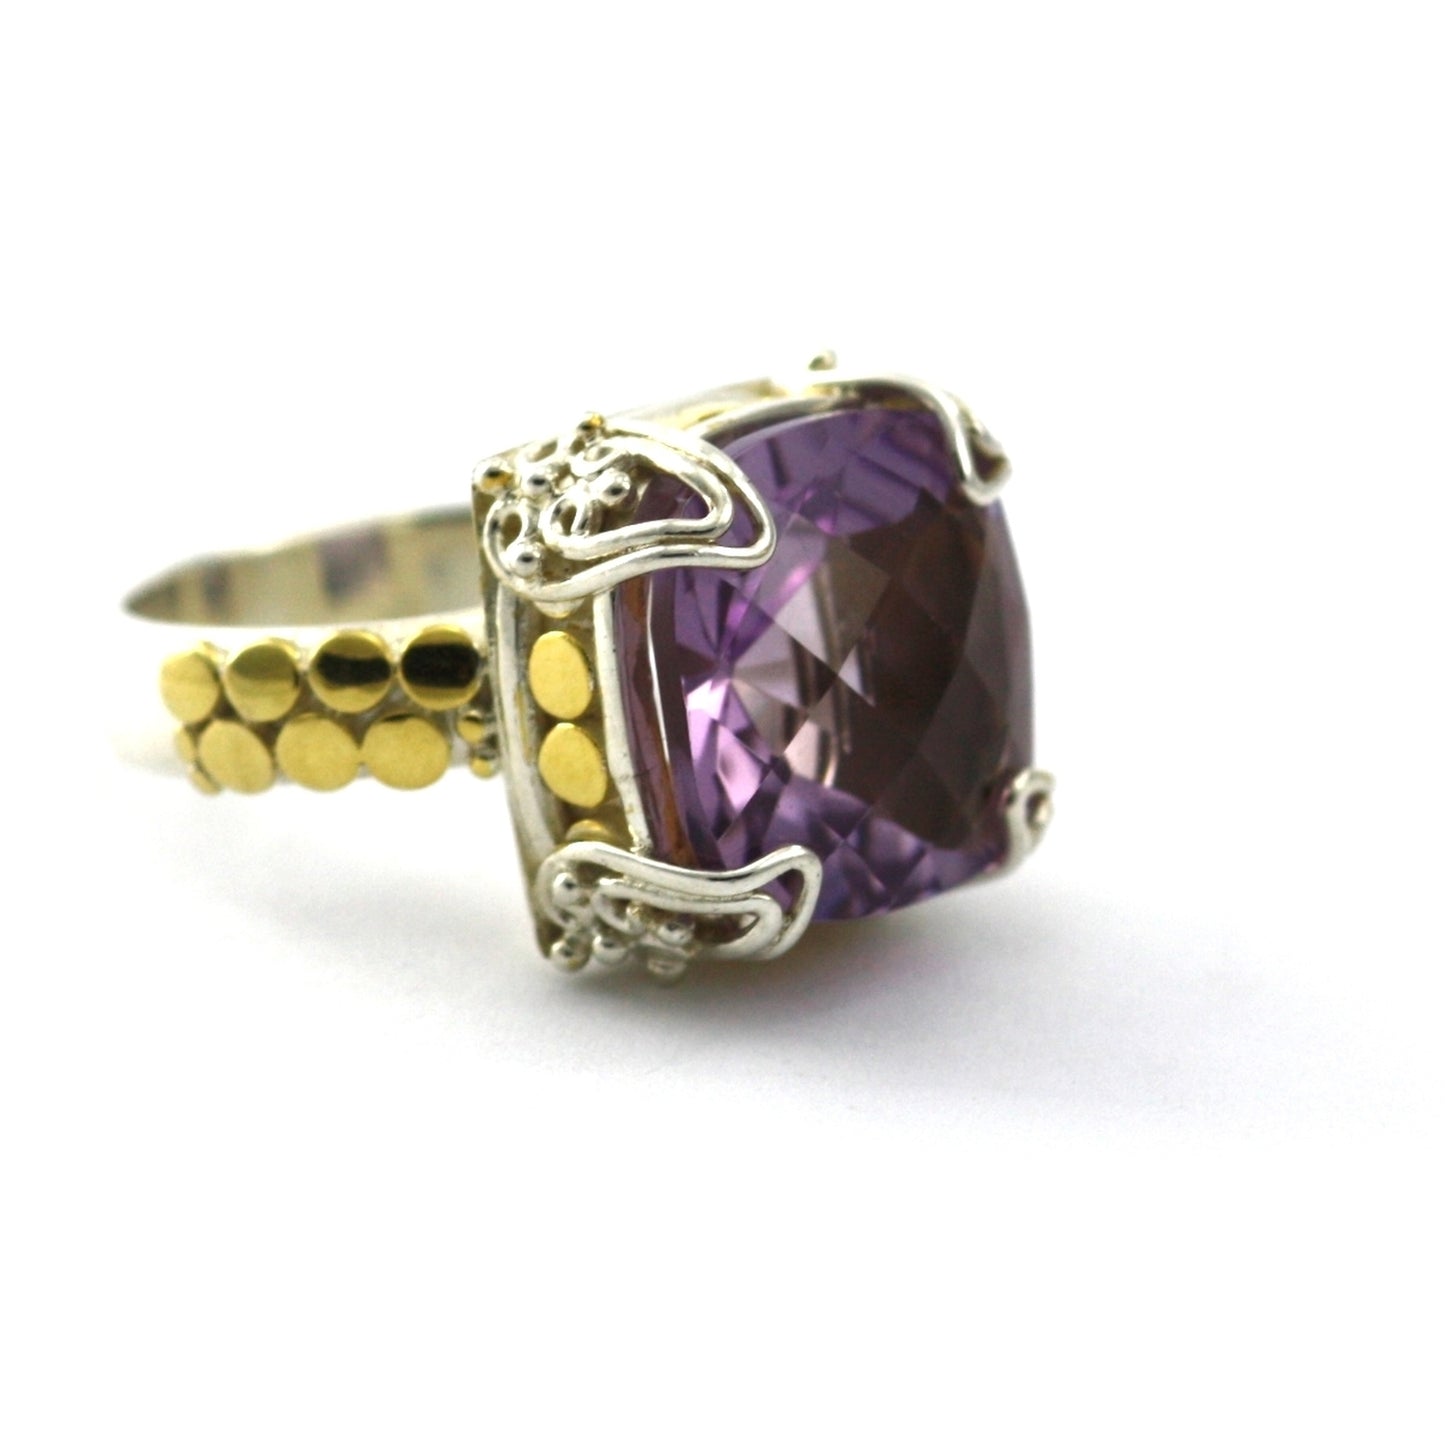 Silver and gold ring with large purple amethyst gemstone.